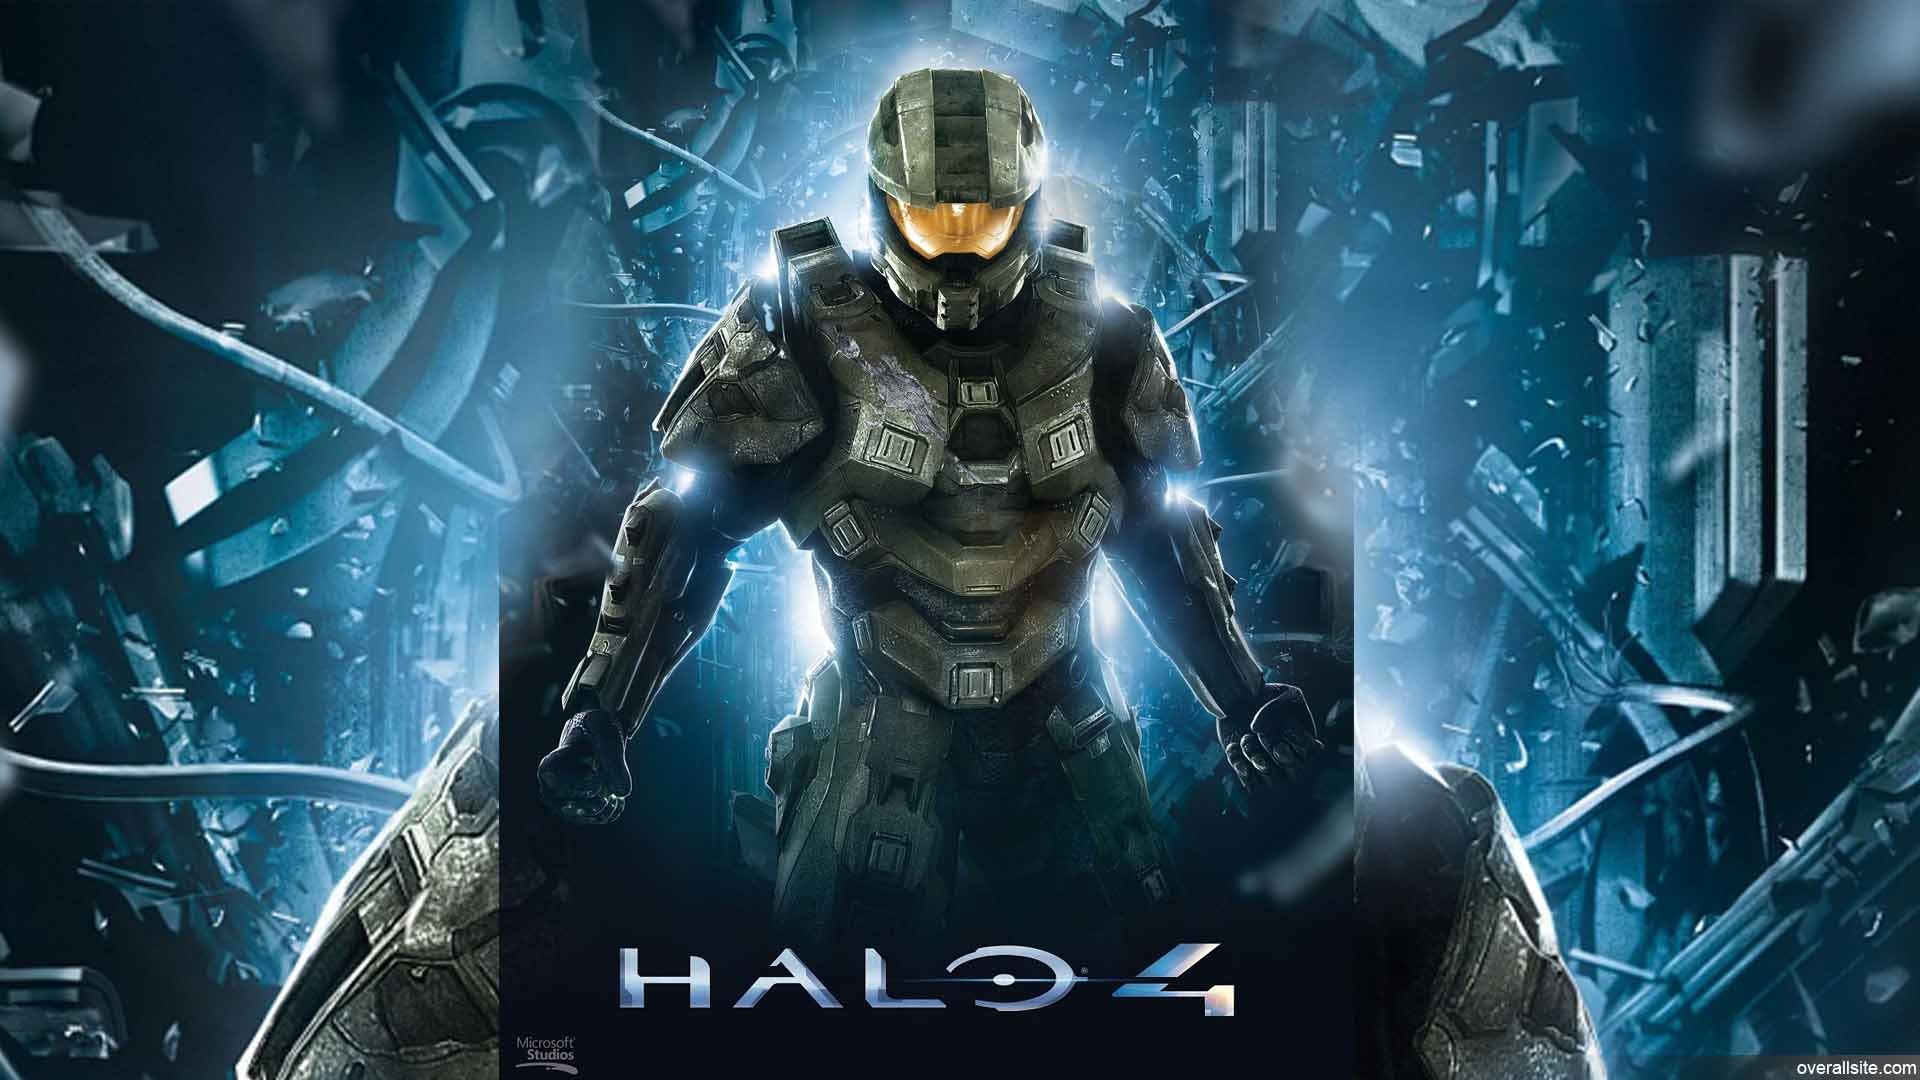 Hd Wallpapers Halo 4 Wallpapers Download 11778 Hd Wallpapers Was